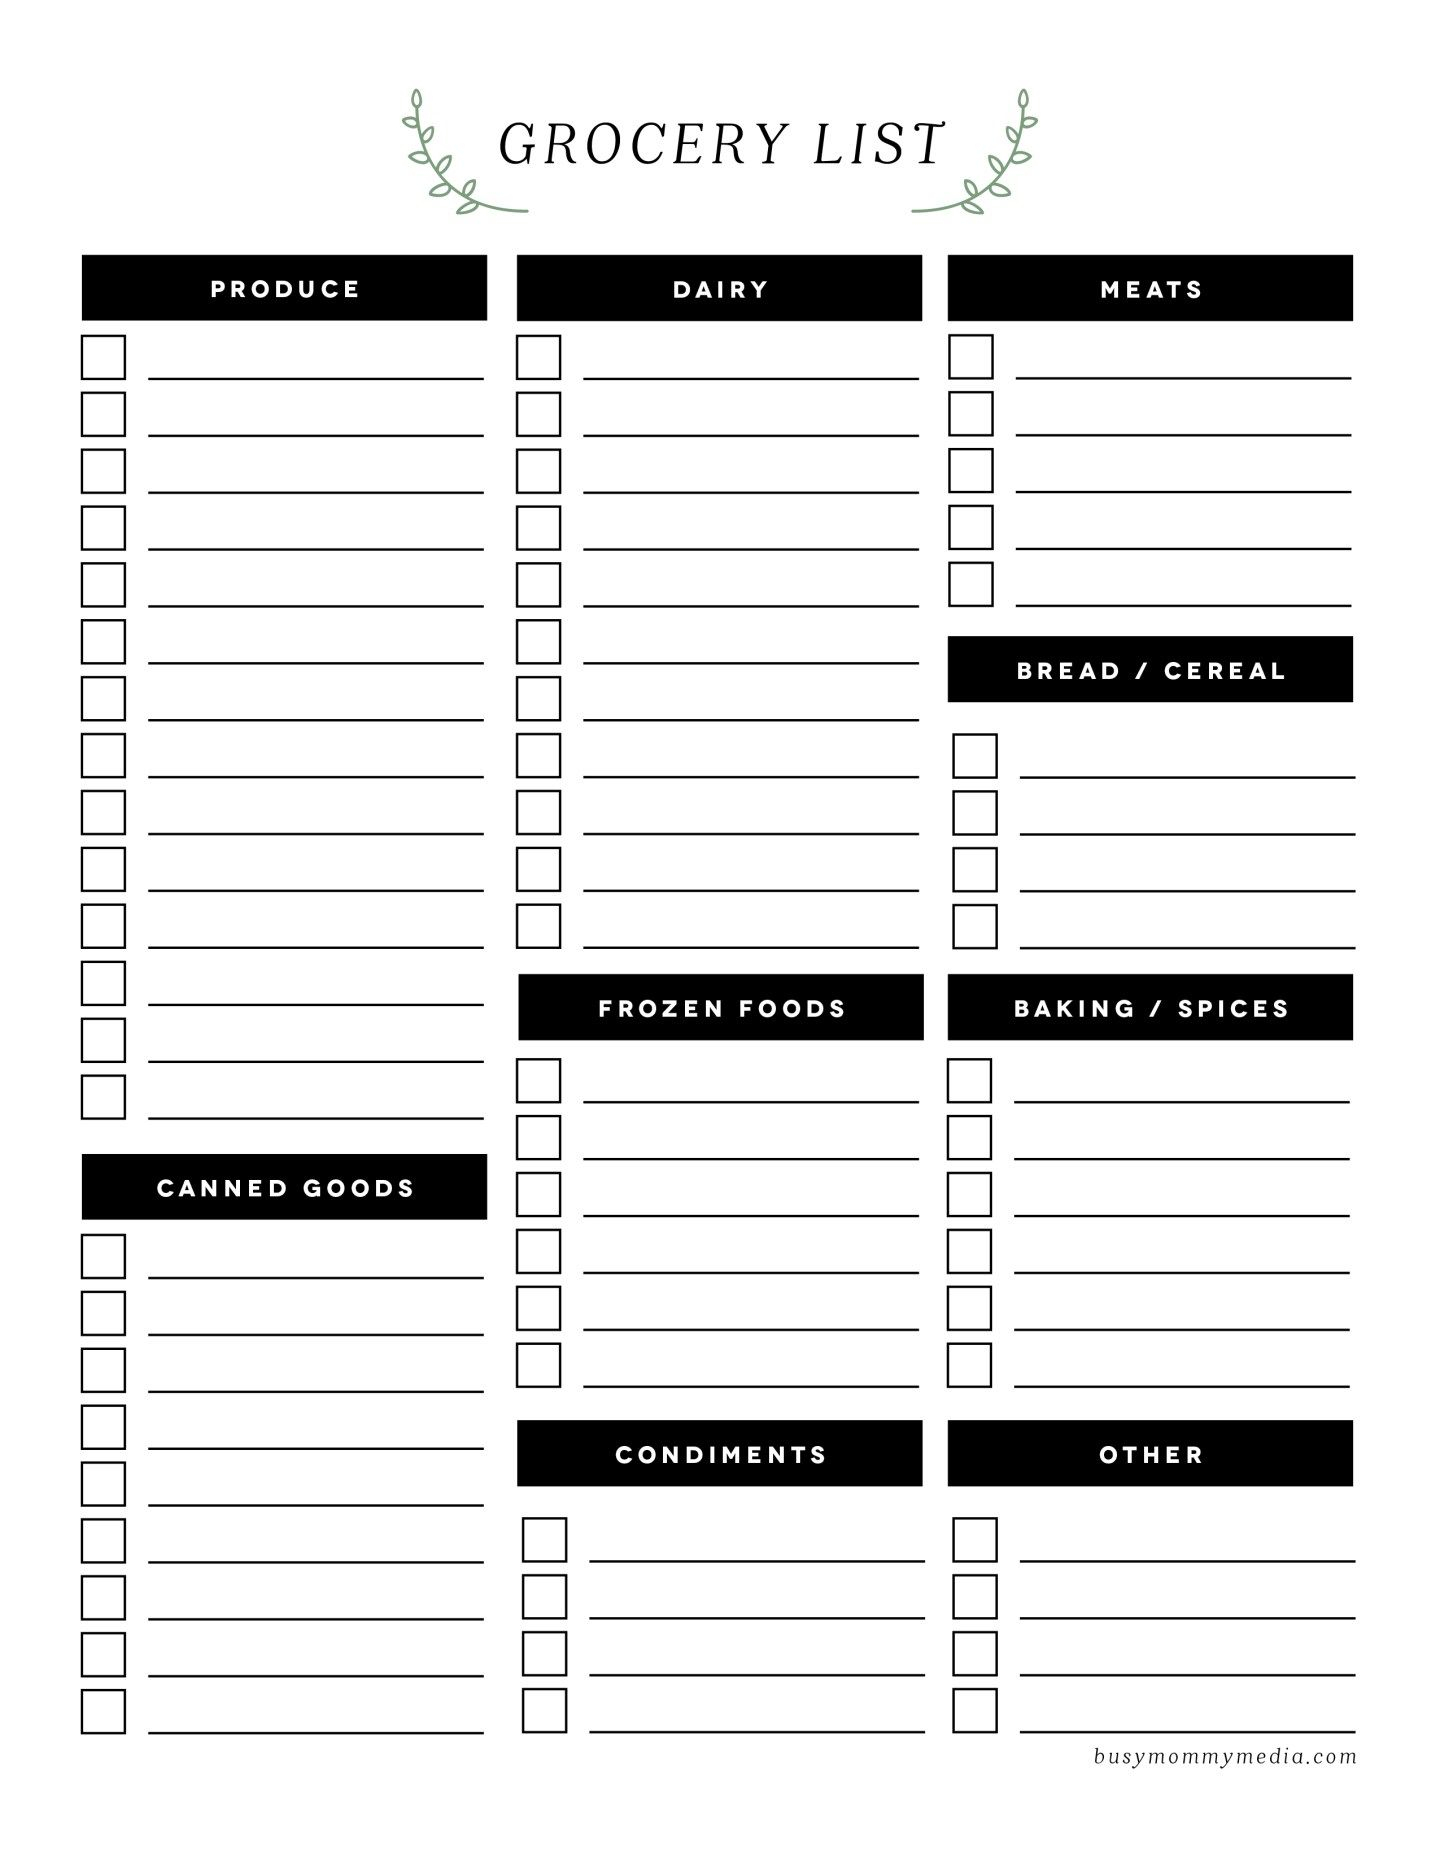 Grocery List Template  louiesportsmouth Regarding Grocery Store Checklist Template